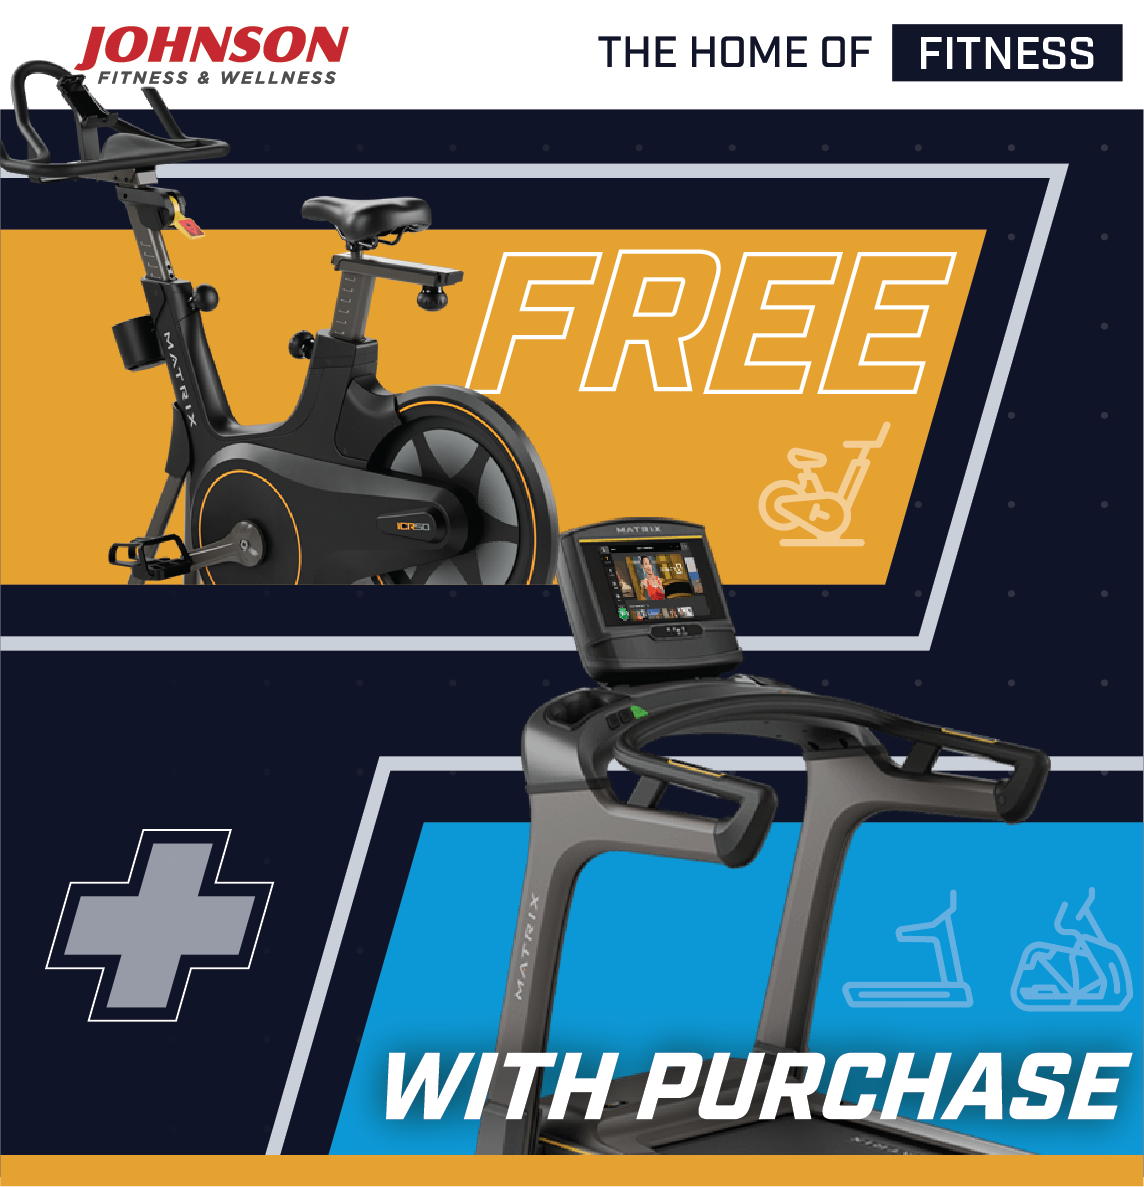 Johnson Fitness Home Your with and Indoor Wellness: a FREE purchase Milled Gym Cycle Build with 